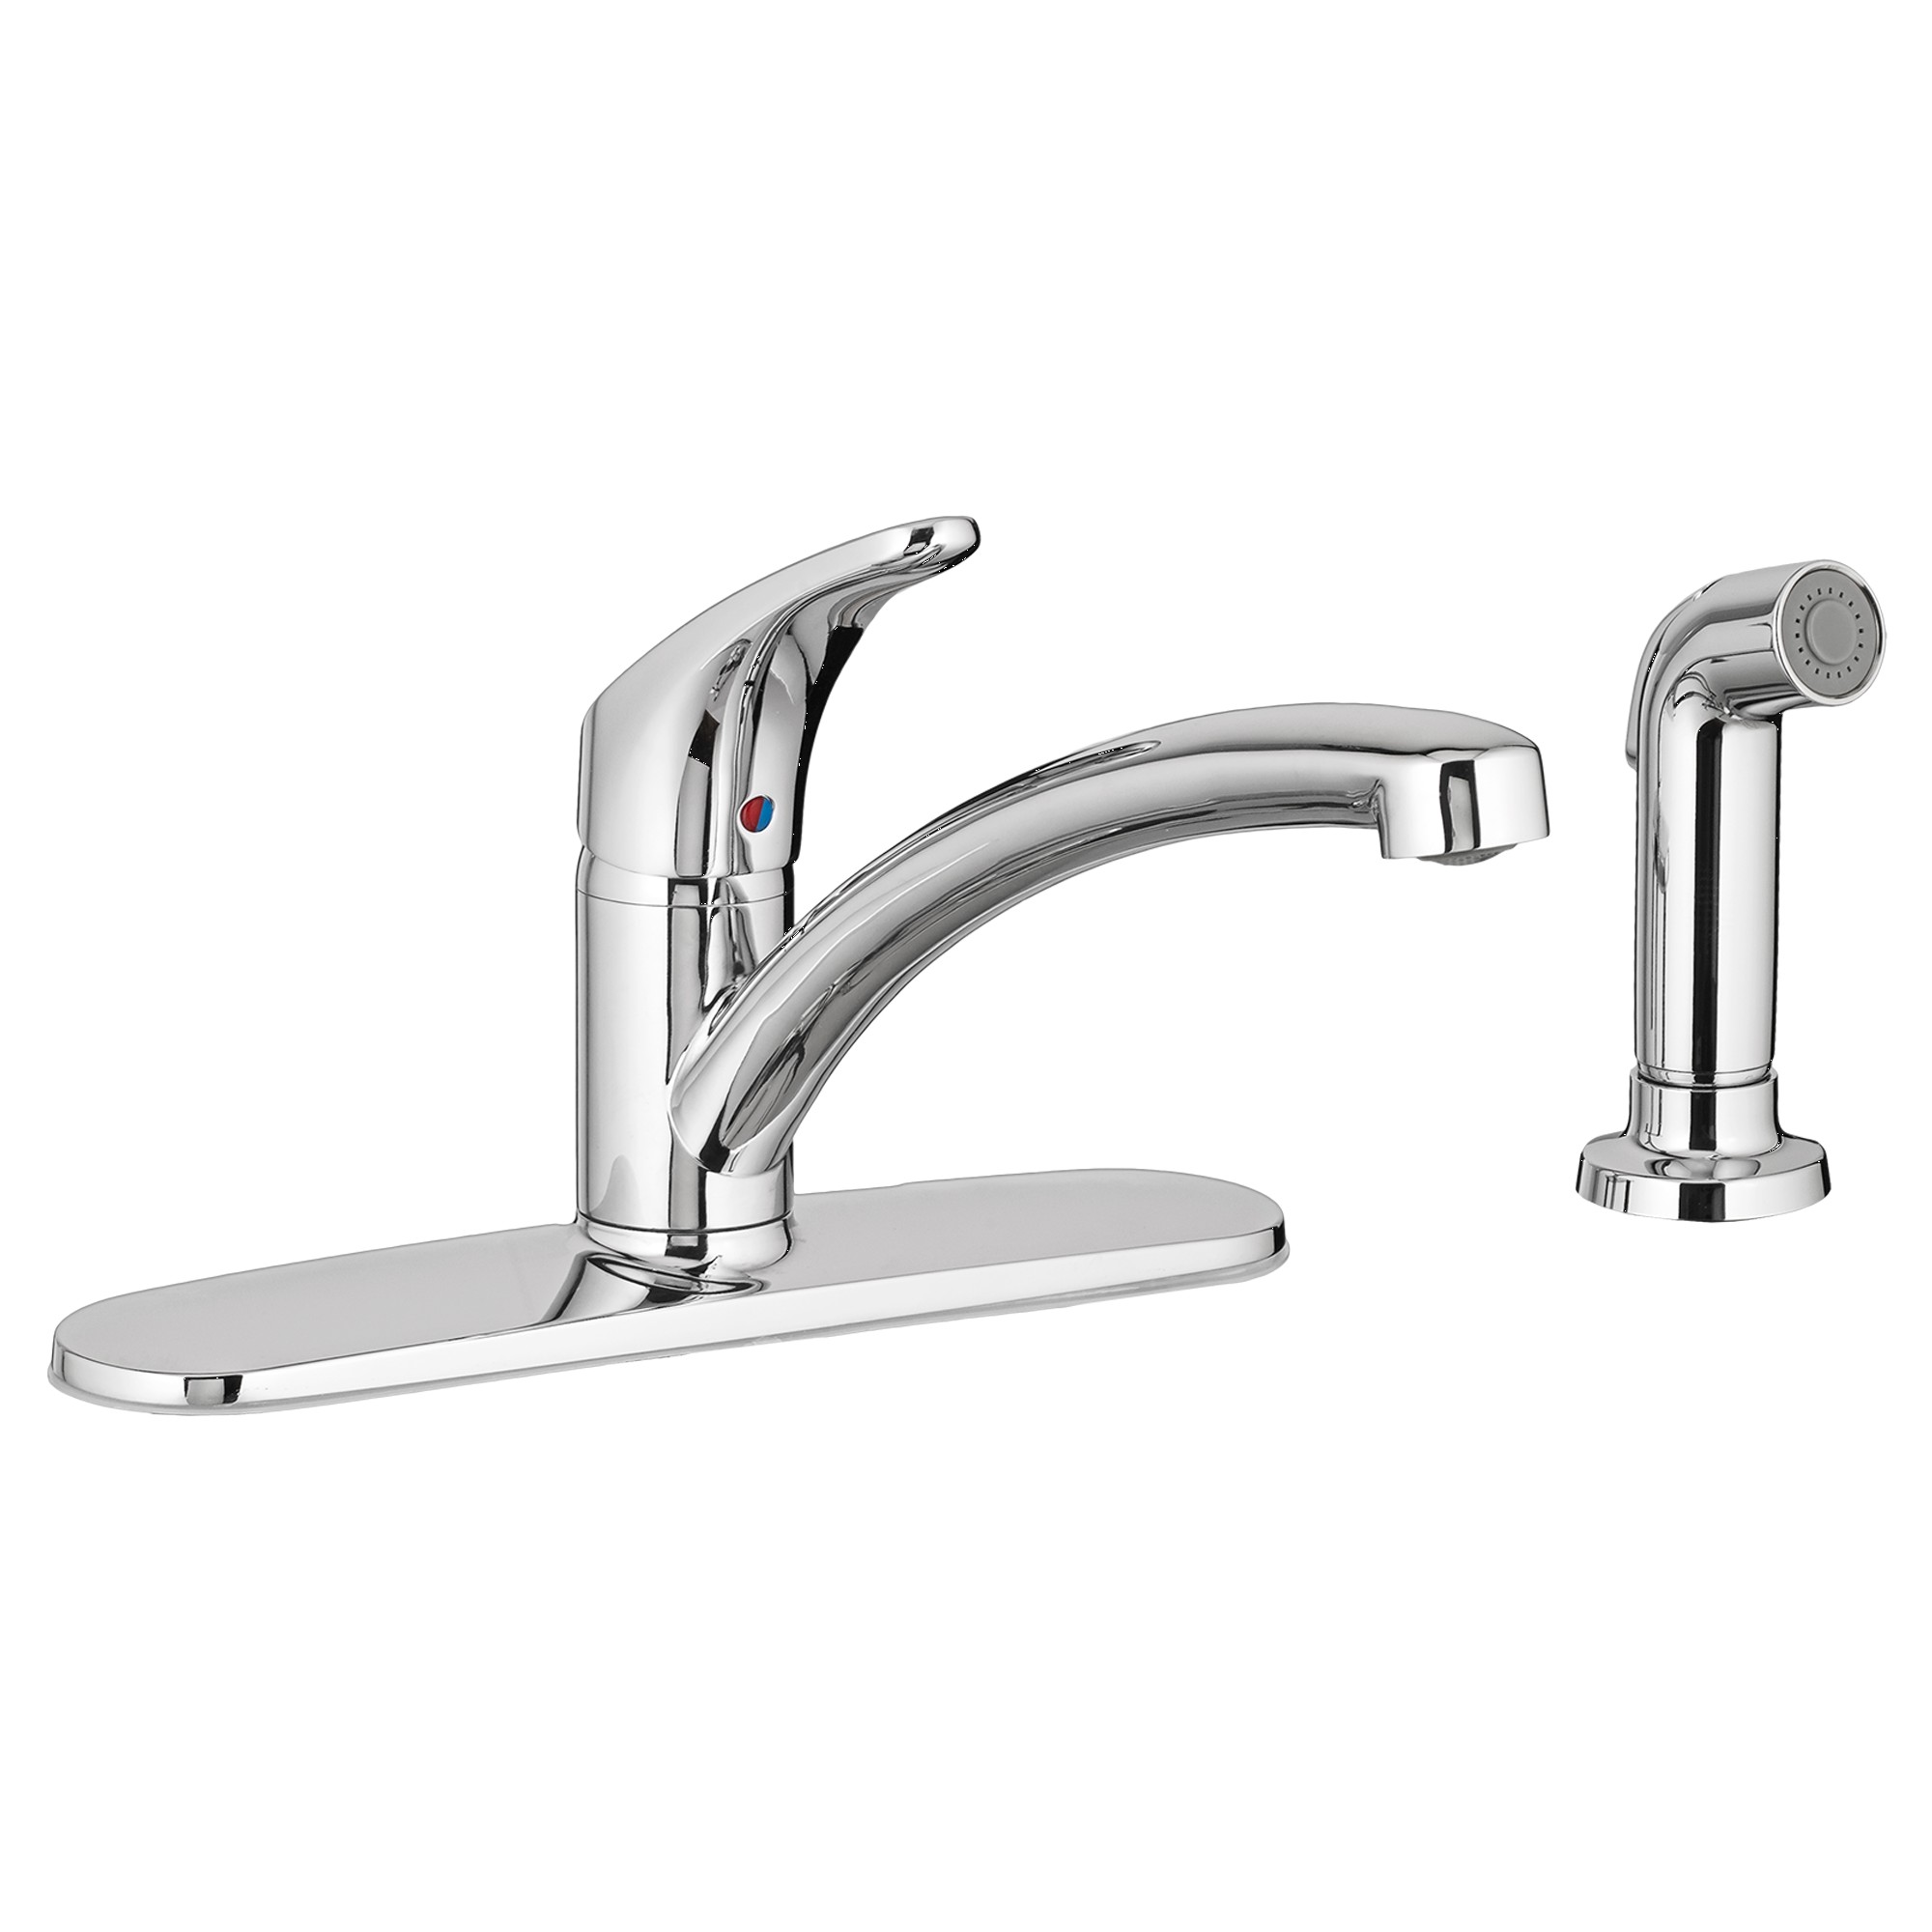 American Standard | 7074.040.002 | AMERICAN STANDARD 7074.040 COLONY PRO 1-HANDLE 4-HOLE KITCHEN FAUCET WITH SIDE SPRAY CP 002 POLISHED CHROME